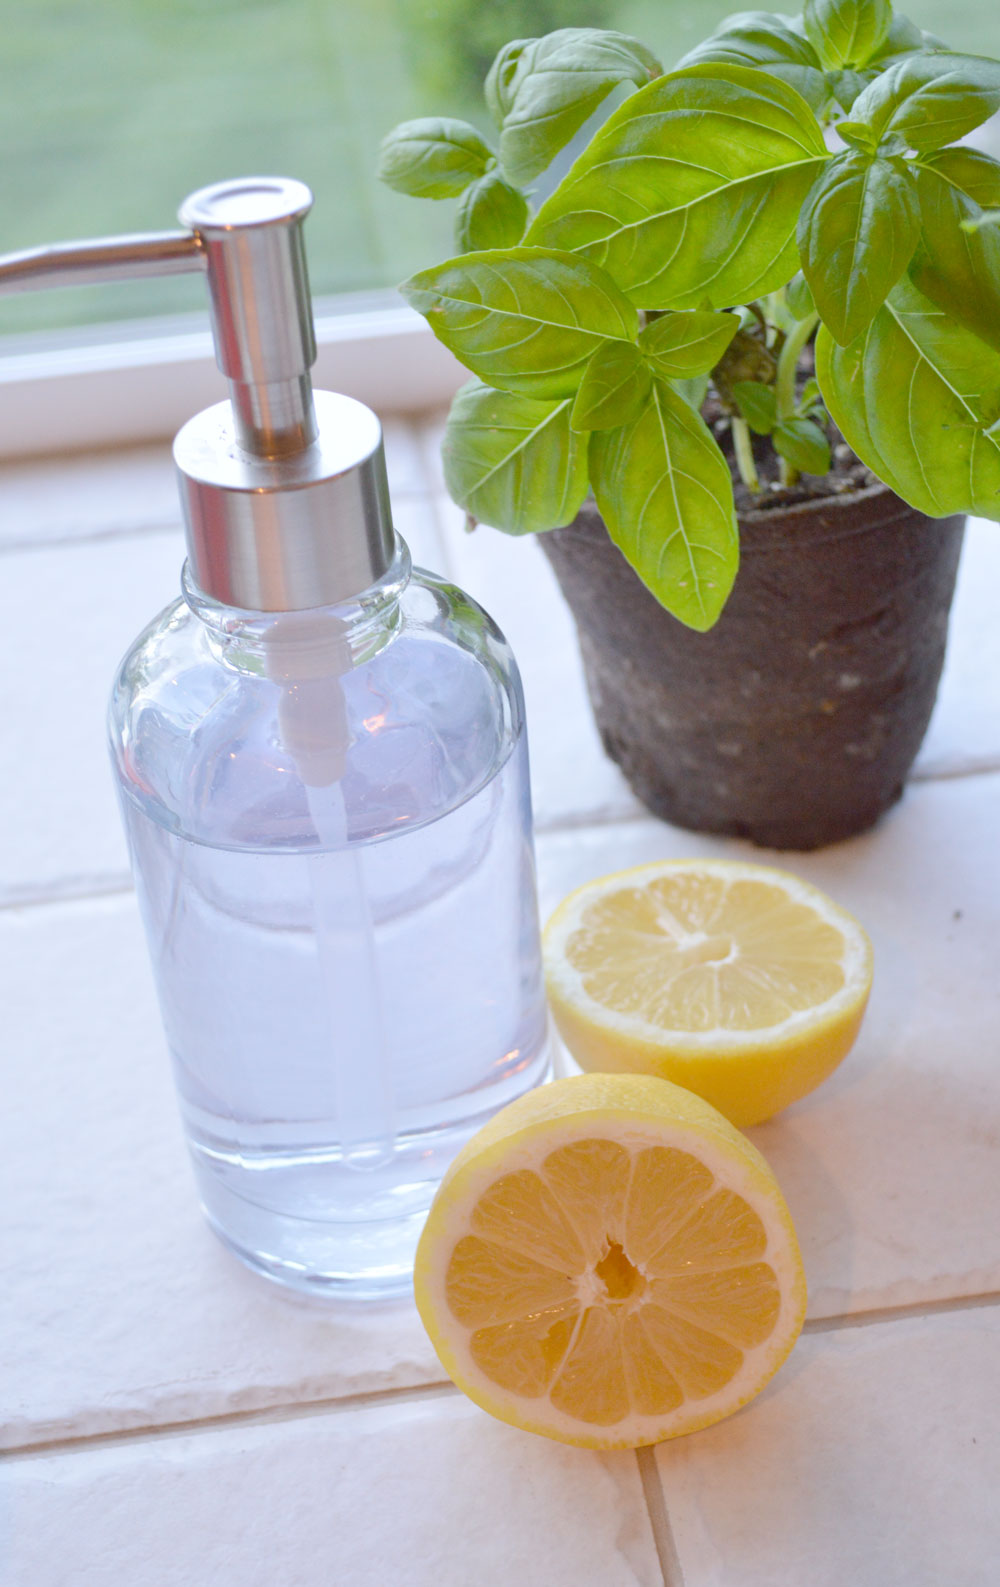 Cleaning with lemon - tips to degrease your sink and stove - Mommy Scene